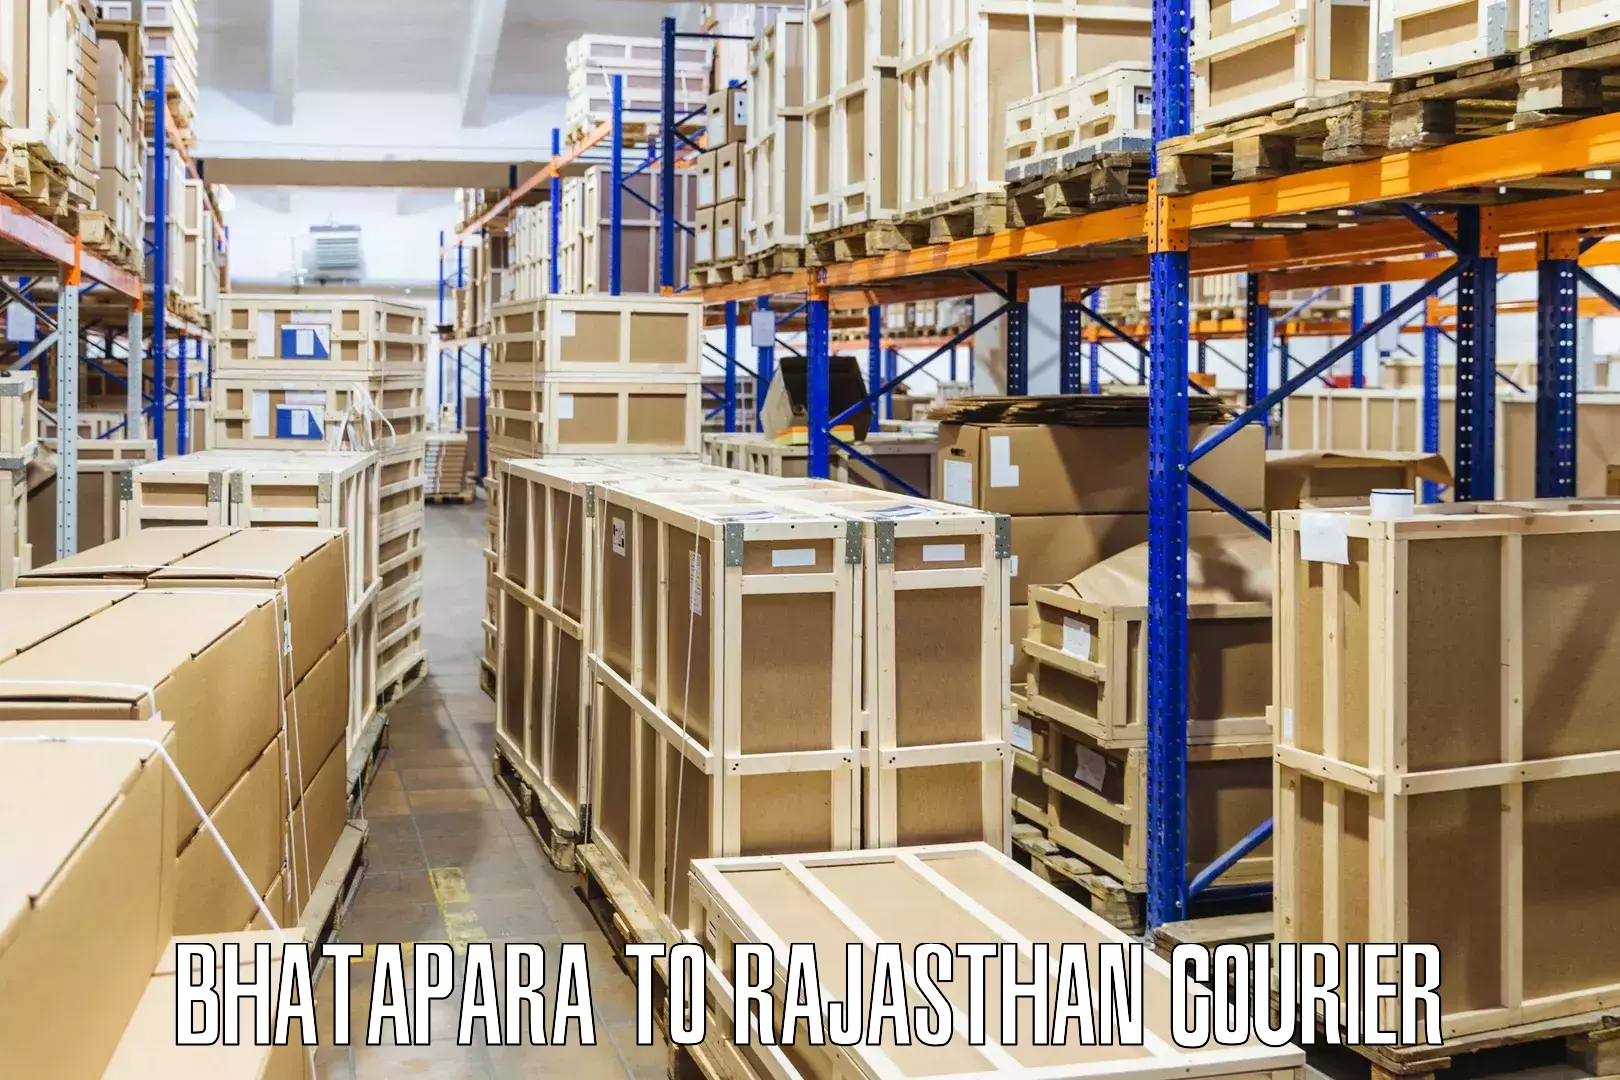 Efficient package consolidation Bhatapara to Behror